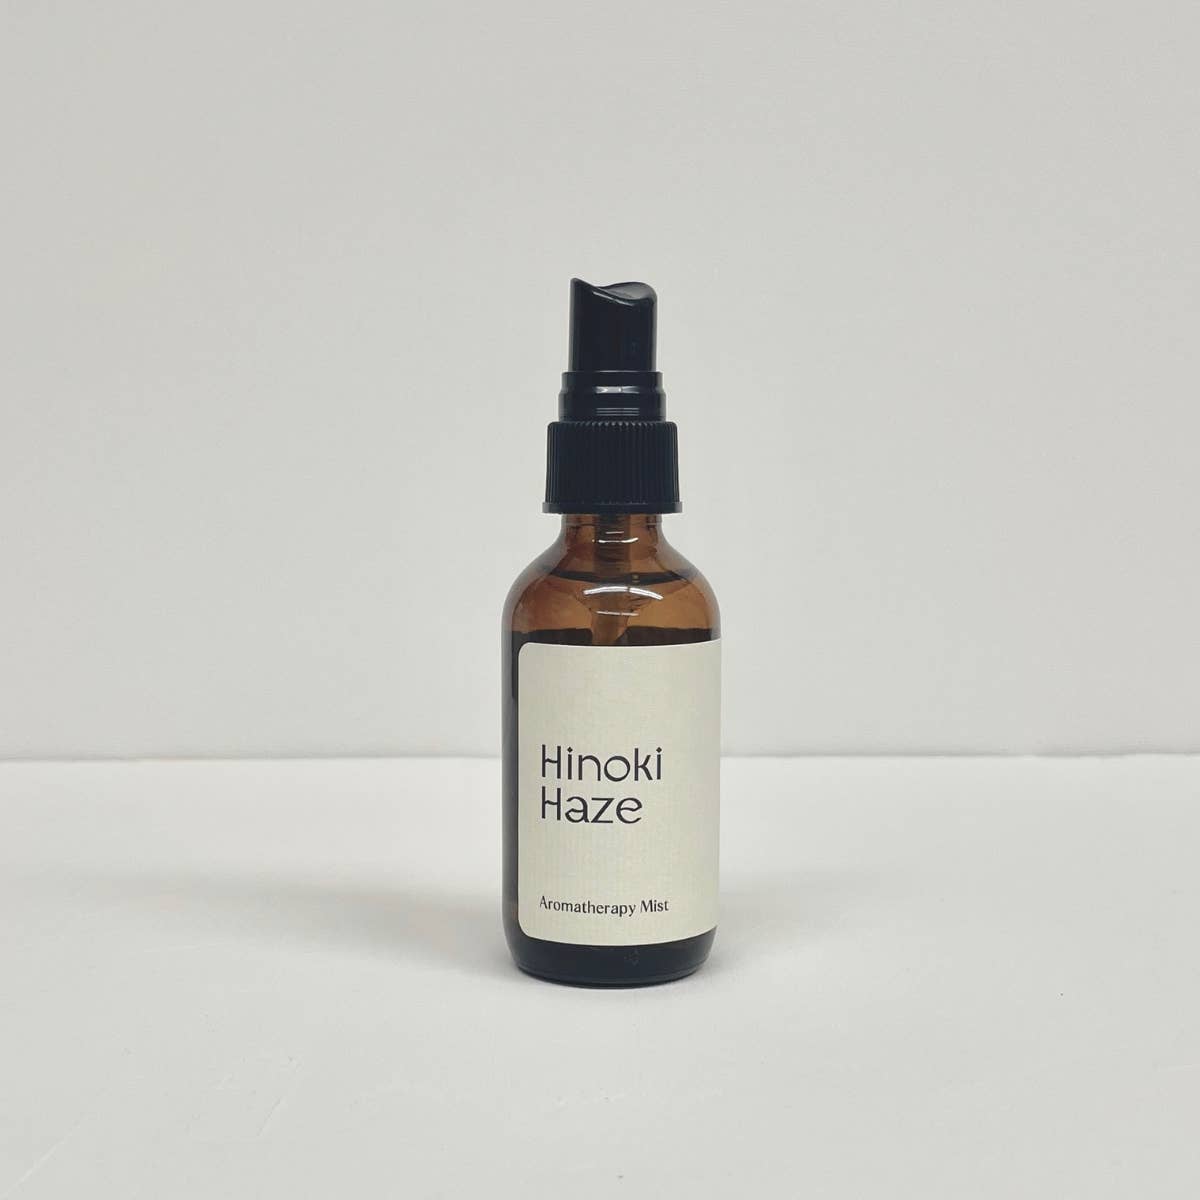 A uniquely wild, woody, and natural blend of hinoki wood, lavender, and sage that helps you find your mellow. Hinoki haze can be used to create a calm and meditative space for letting it all go and feeling some peace of mind. Crafted with intention using organic and wildcrafted essential oils.